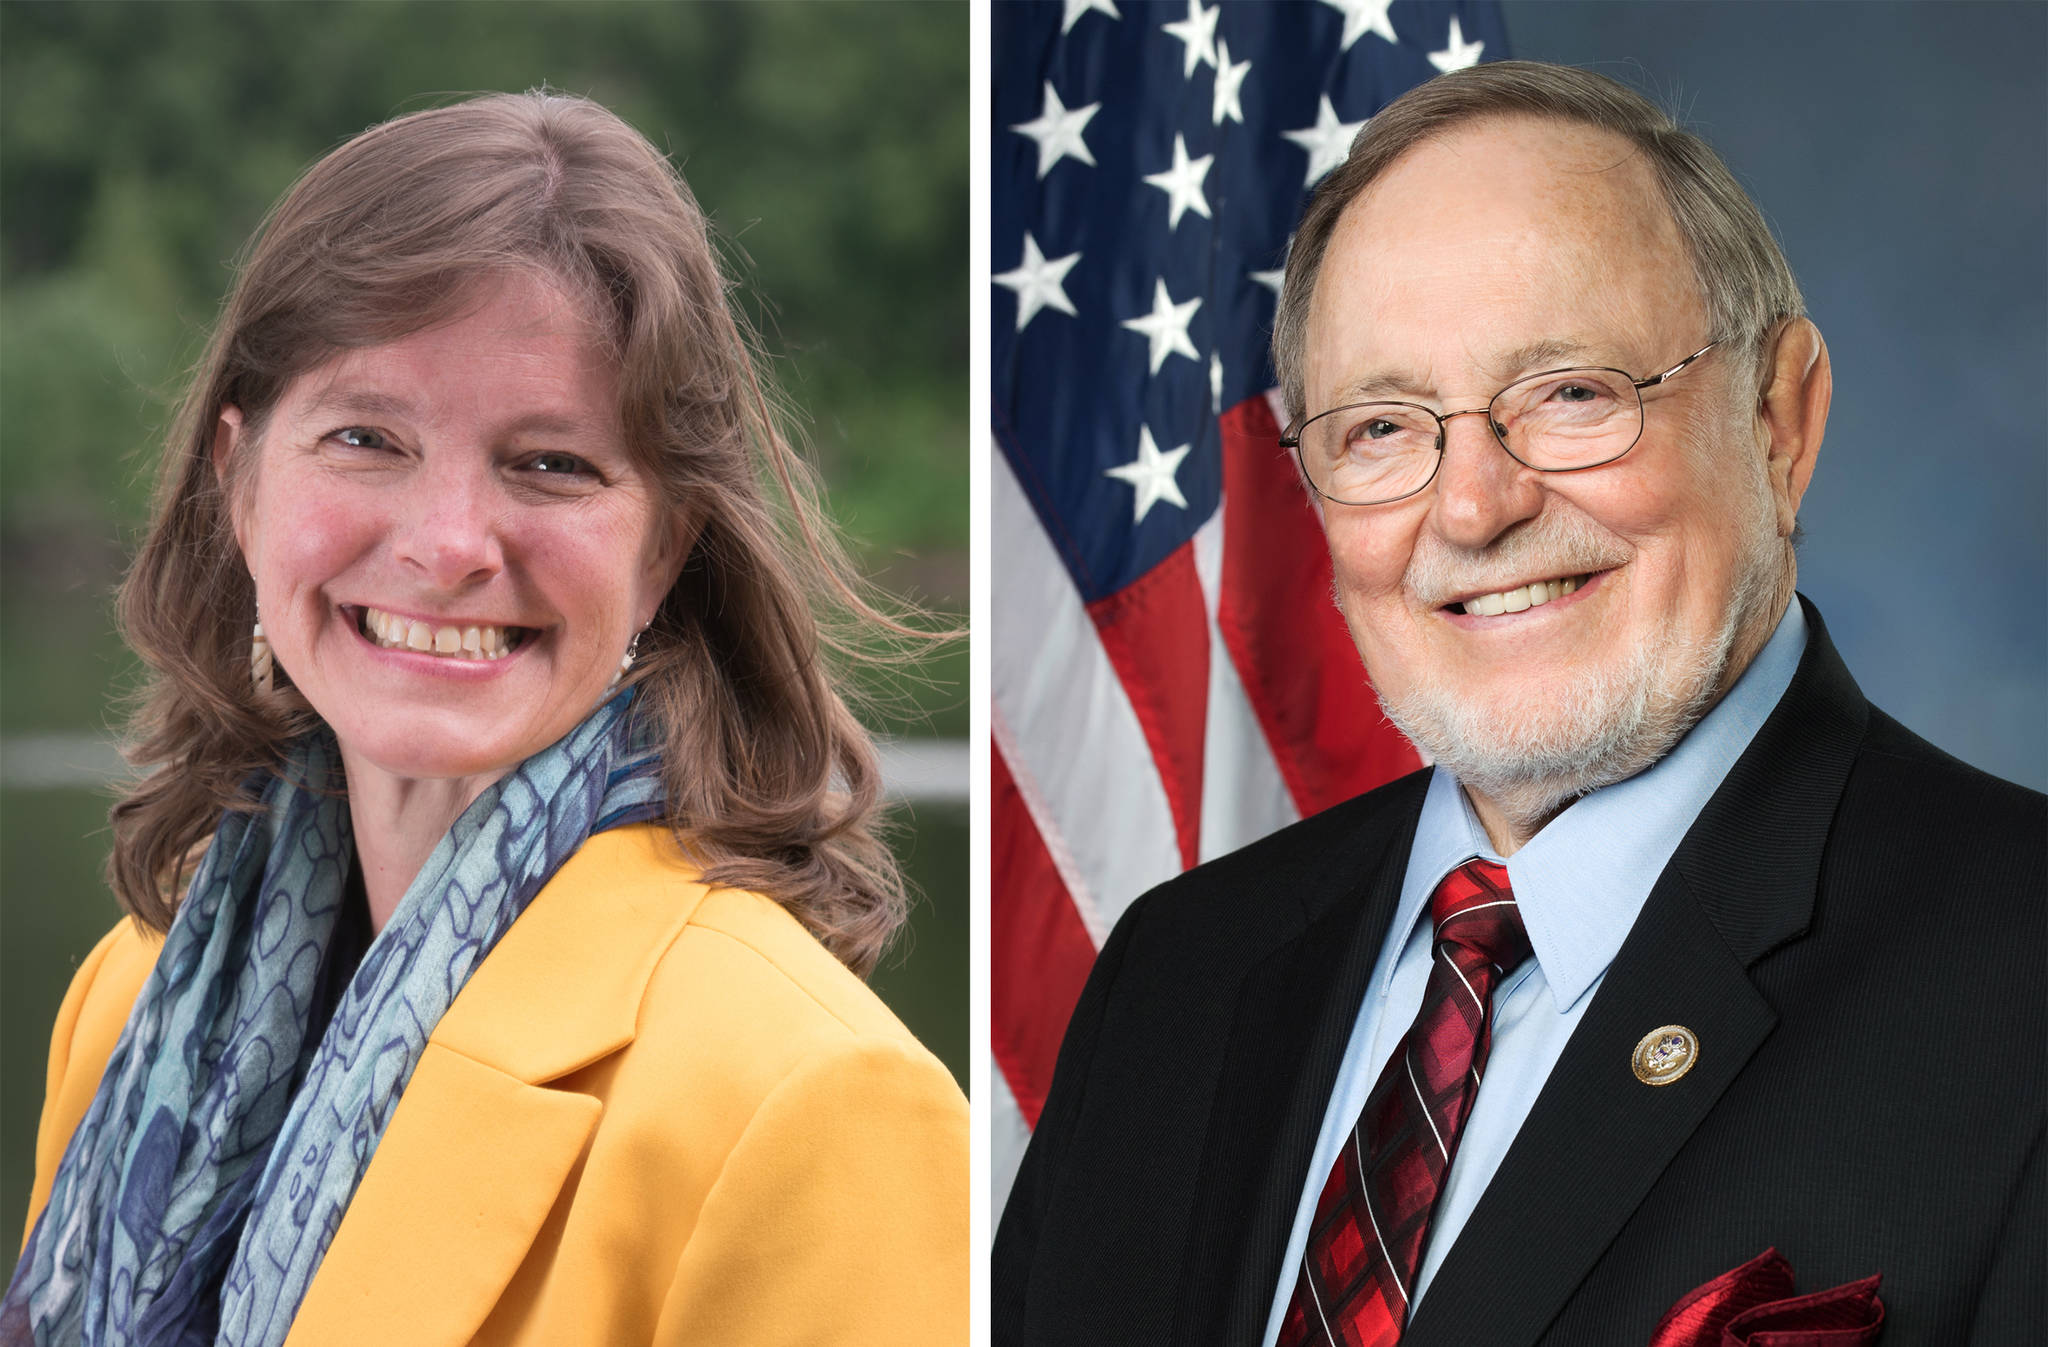 Alyse Galvin, indpendent candidate for U.S. House of Representatives, and Don Young, Republican incumbent candidate for U.S. House, are seen in a composite image using photographs submitted by their campaigns. (Composite image)